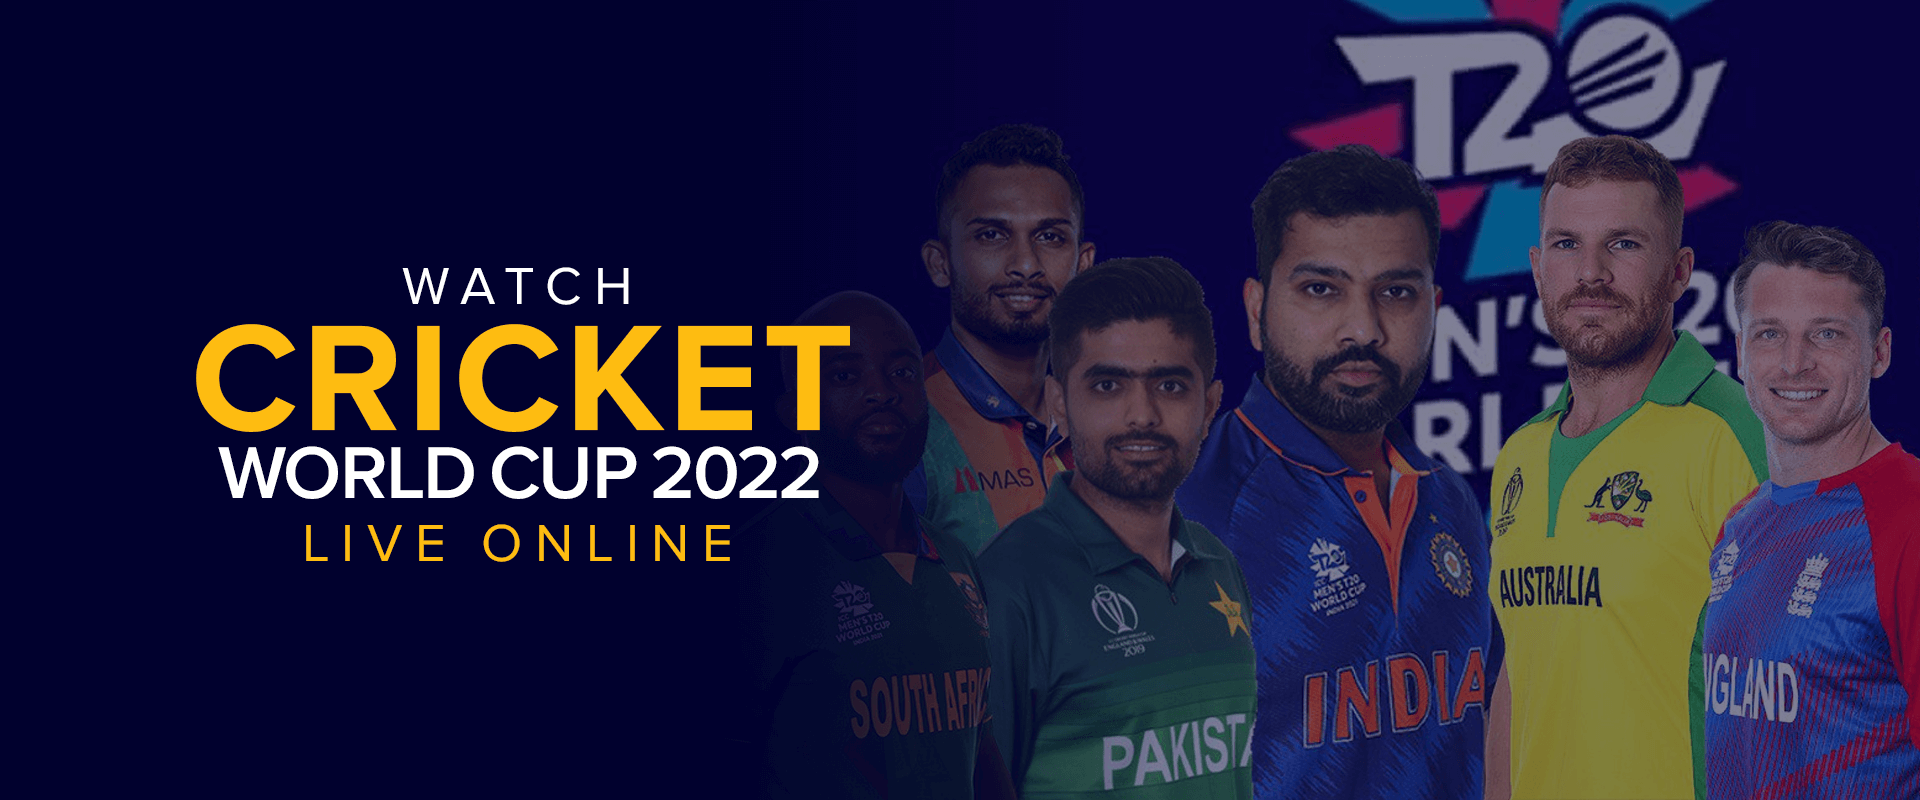 t20 world cup 2022 online streaming